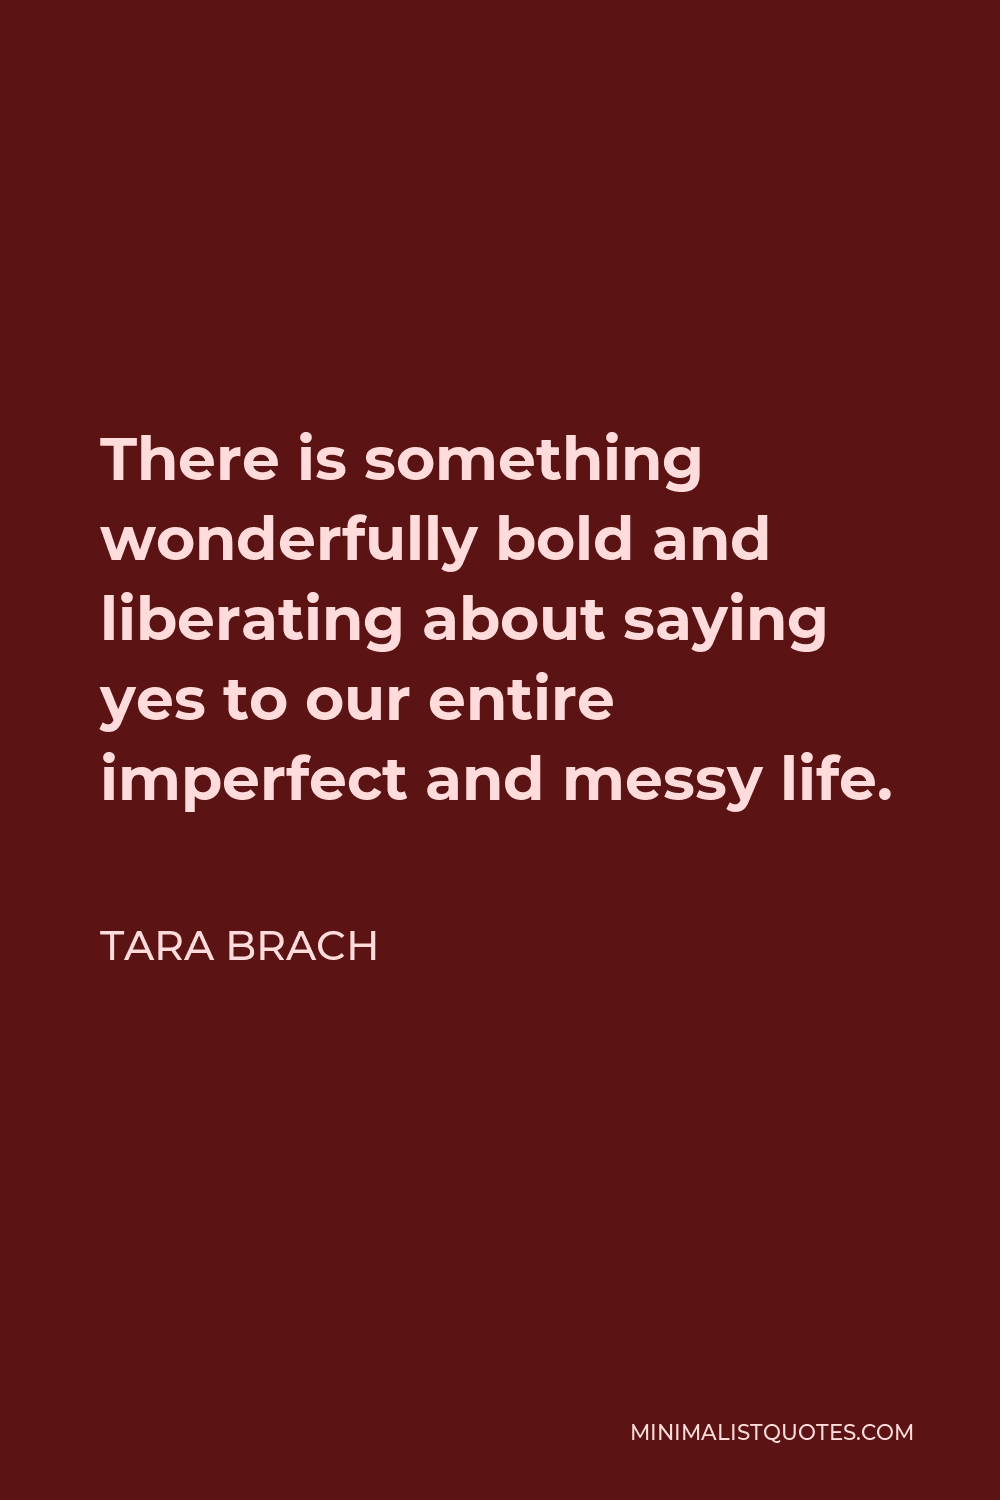 Tara Brach Quote - There is something wonderfully bold and liberating about saying yes to our entire imperfect and messy life.